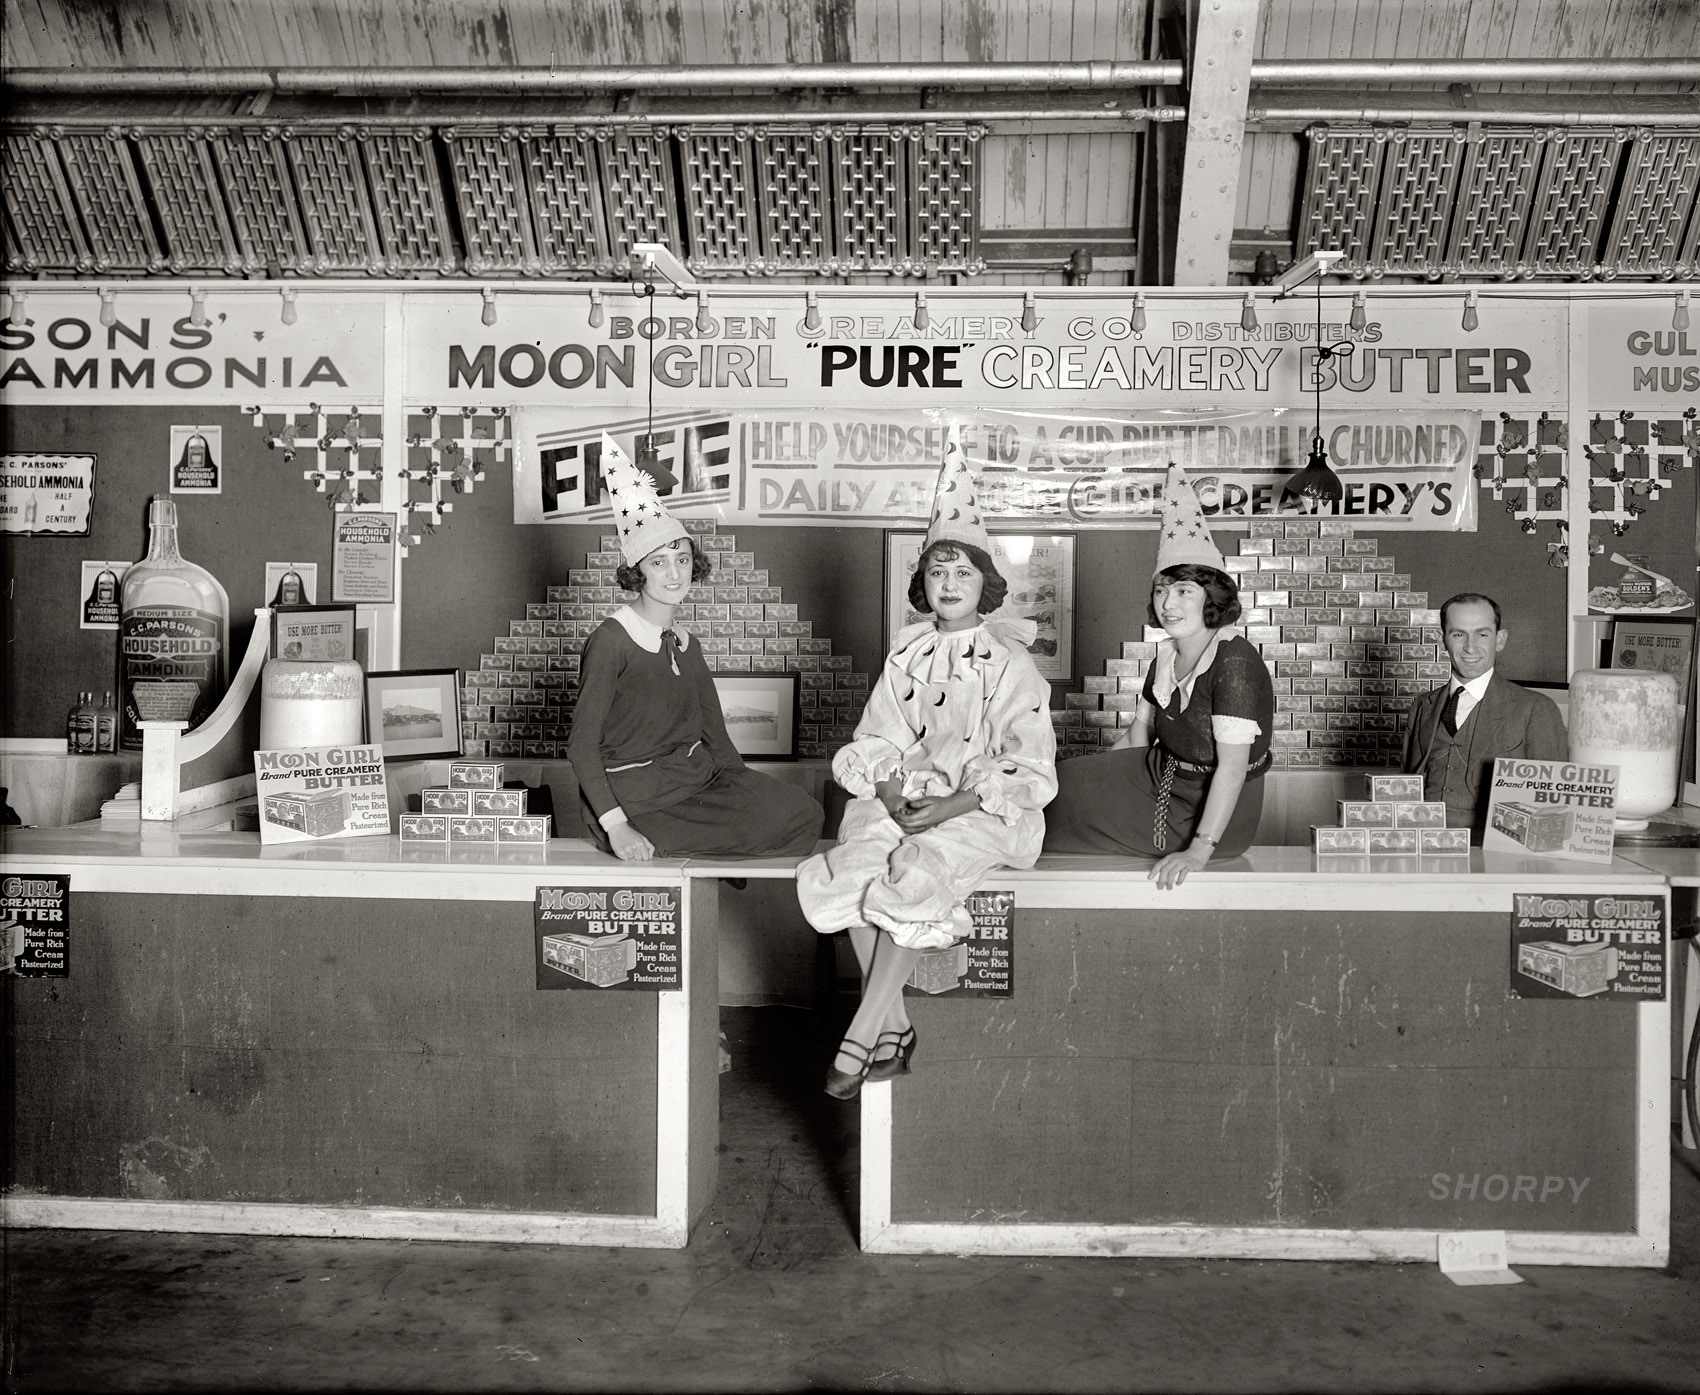 Washington, D.C., 1922. "Food Show. Borden Creamery booth." View full size. National Photo Company Collection glass negative, Library of Congress.